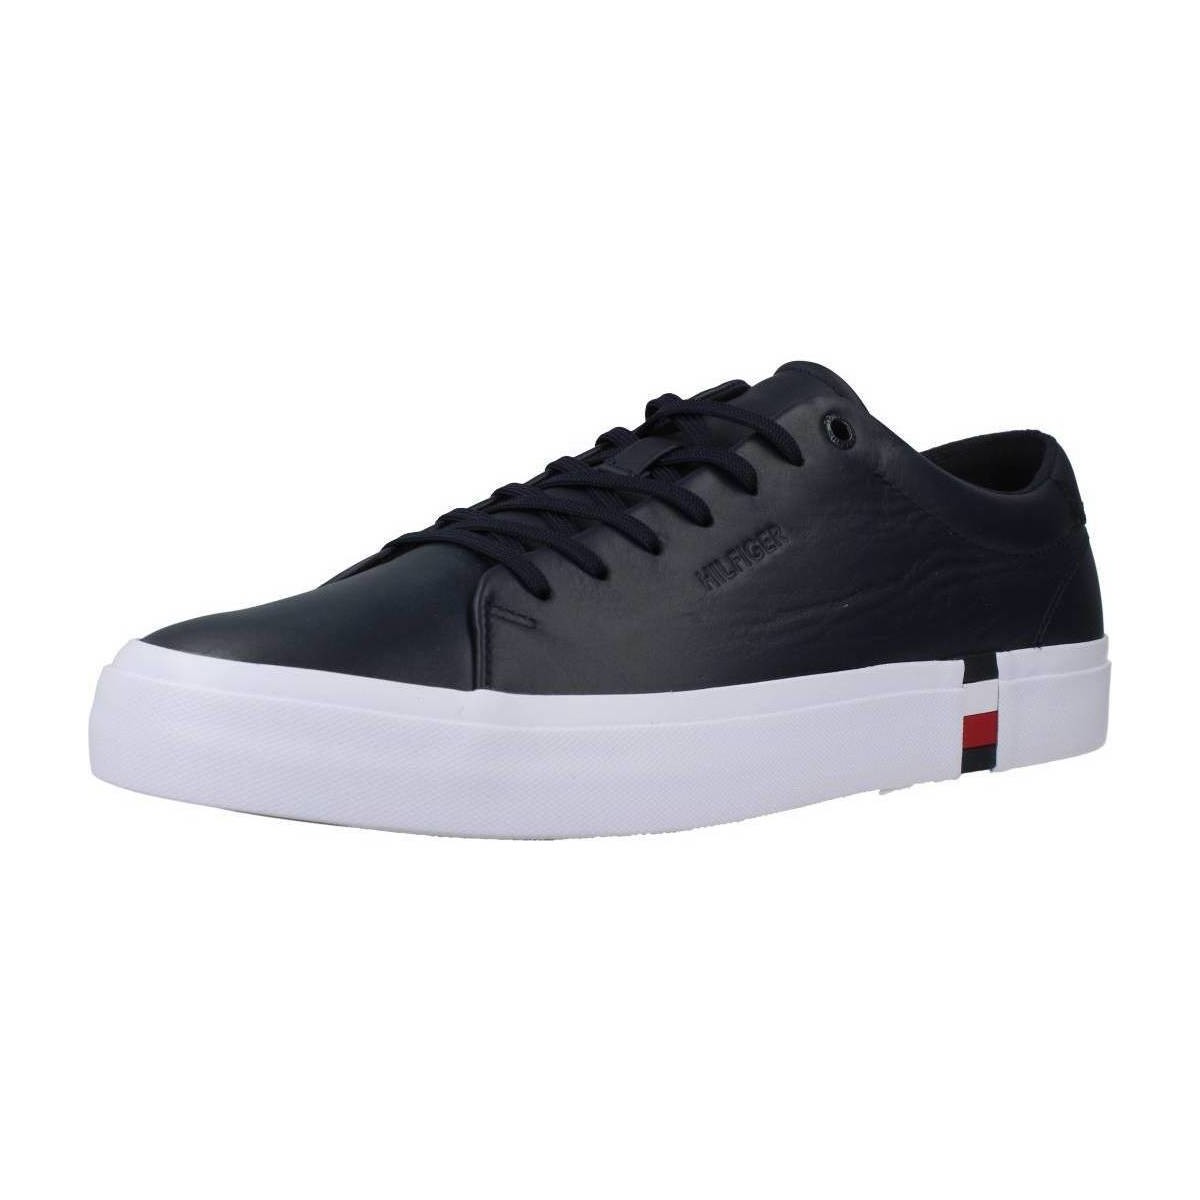 Xαμηλά Sneakers Tommy Hilfiger M0DERN VULC CORPORATE LE